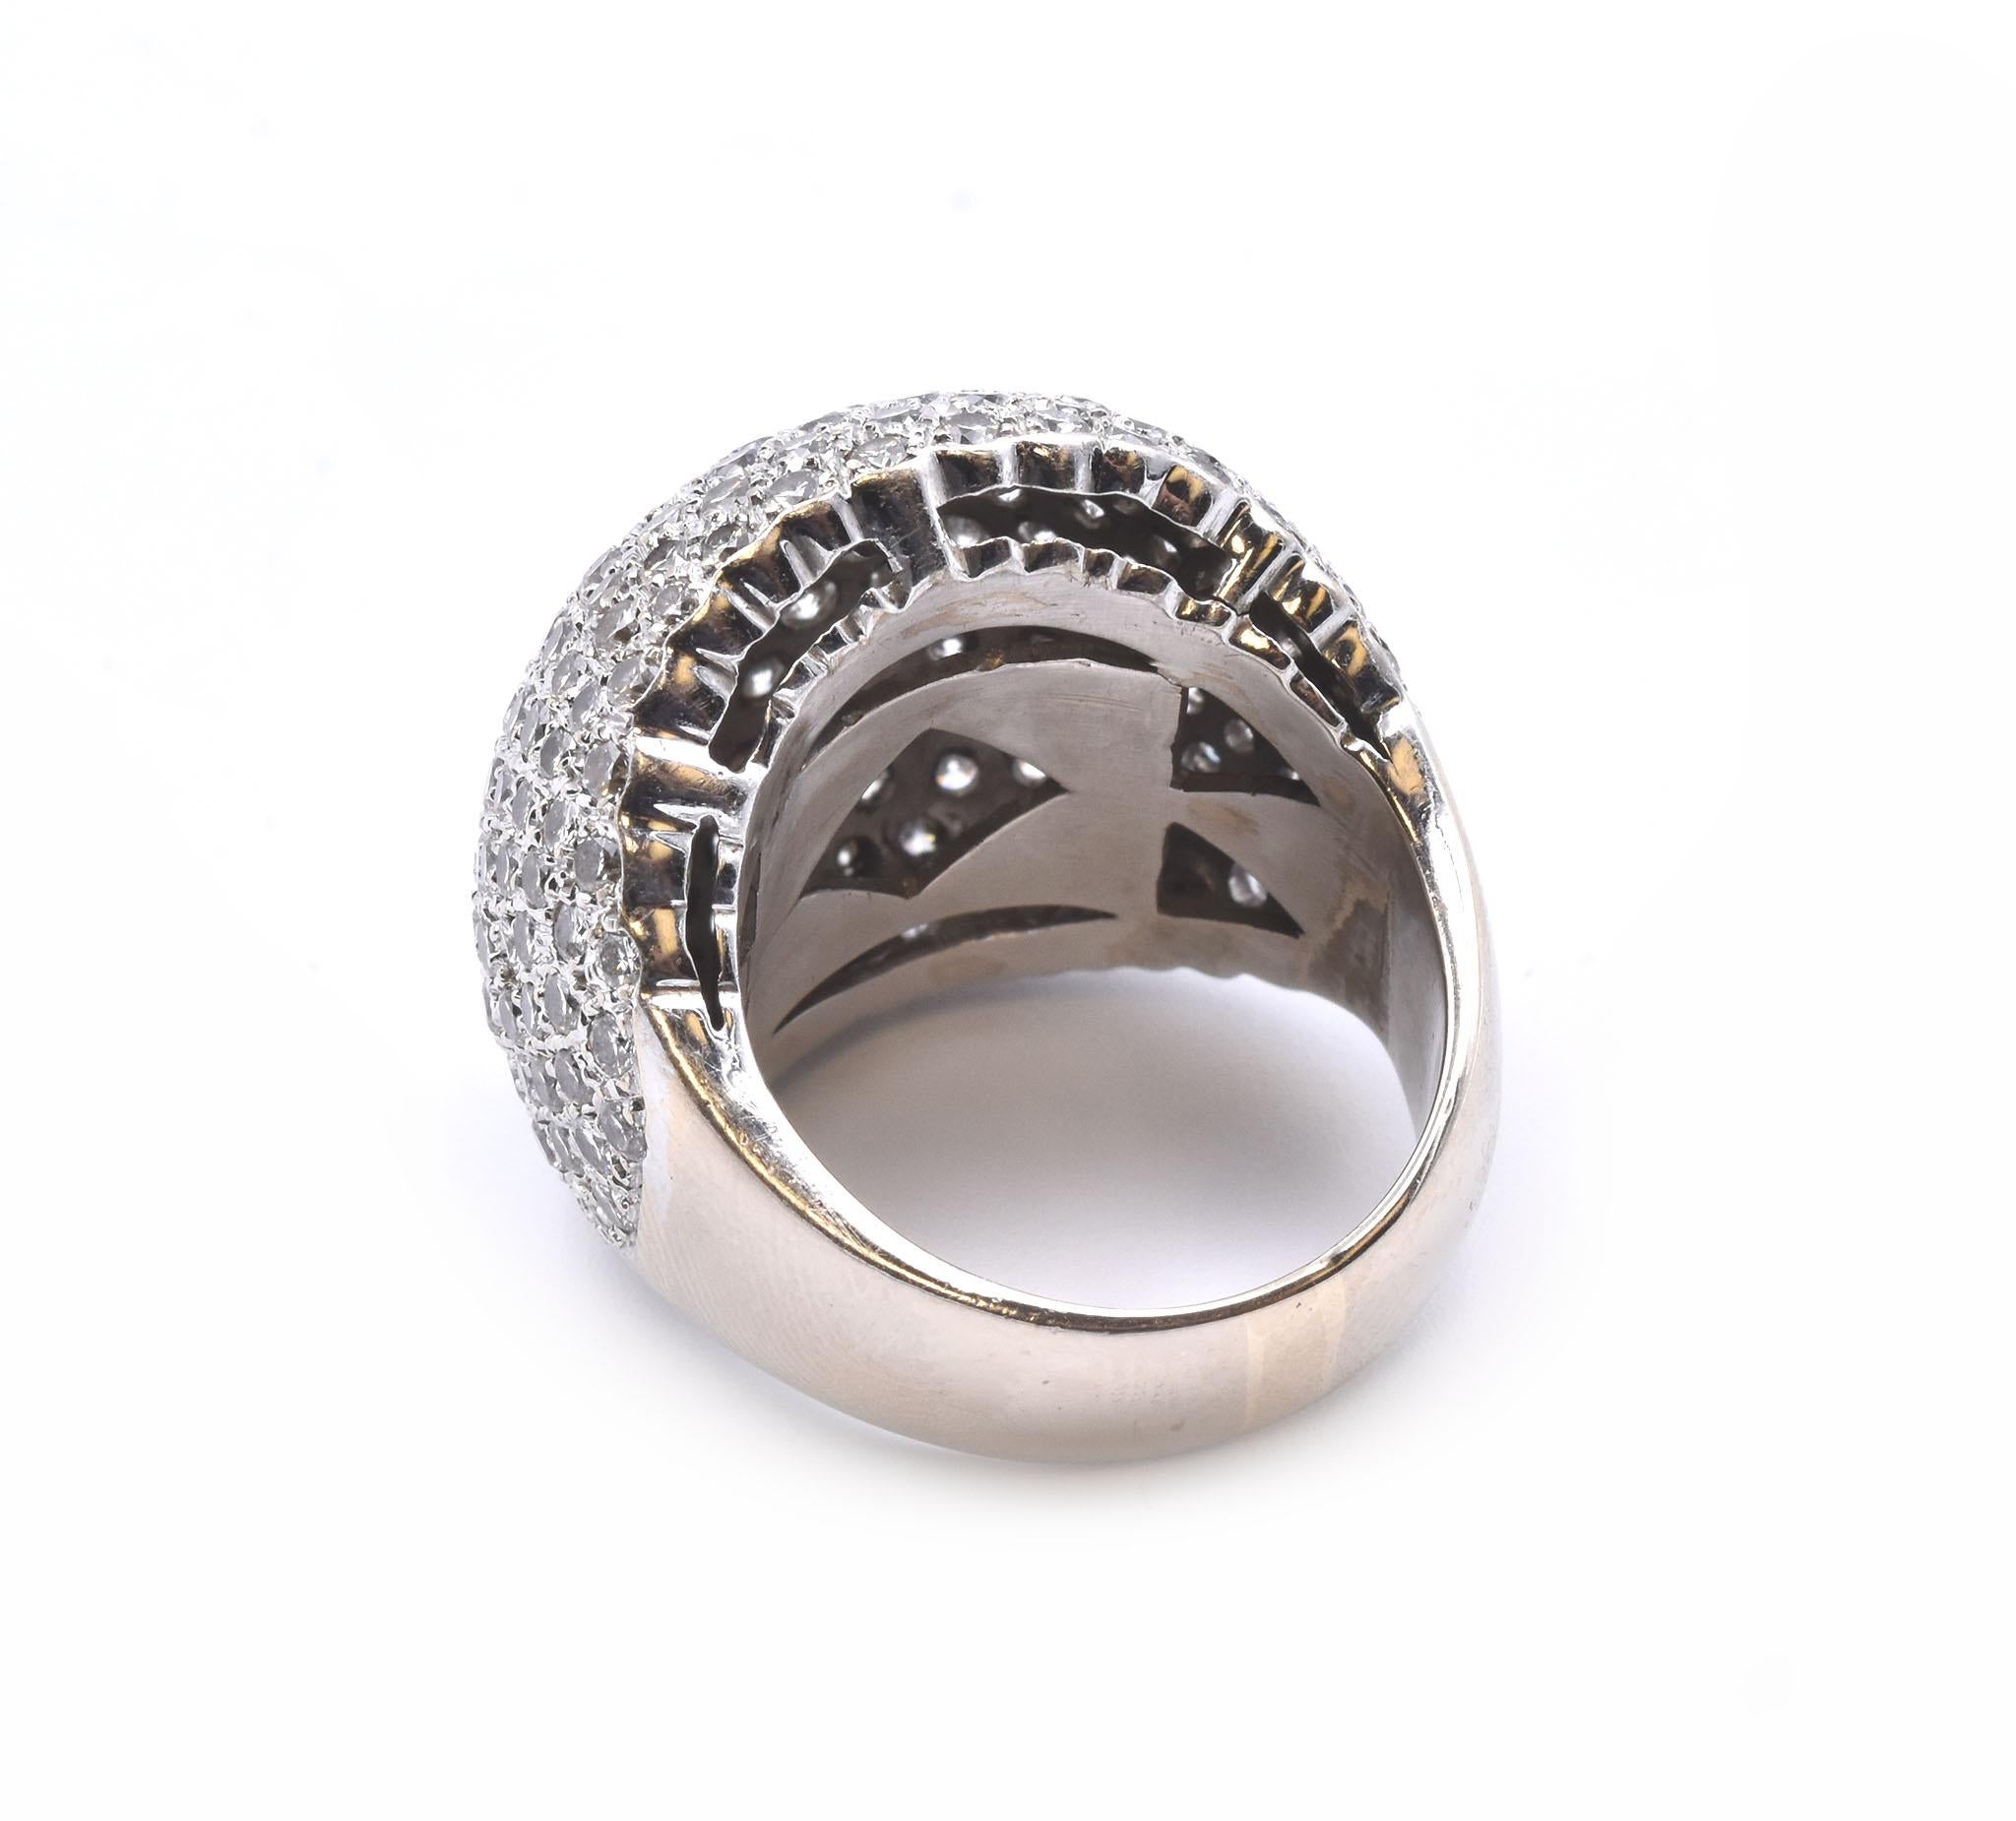 18 Karat White Gold Pave Diamond Dome Ring In Excellent Condition For Sale In Scottsdale, AZ